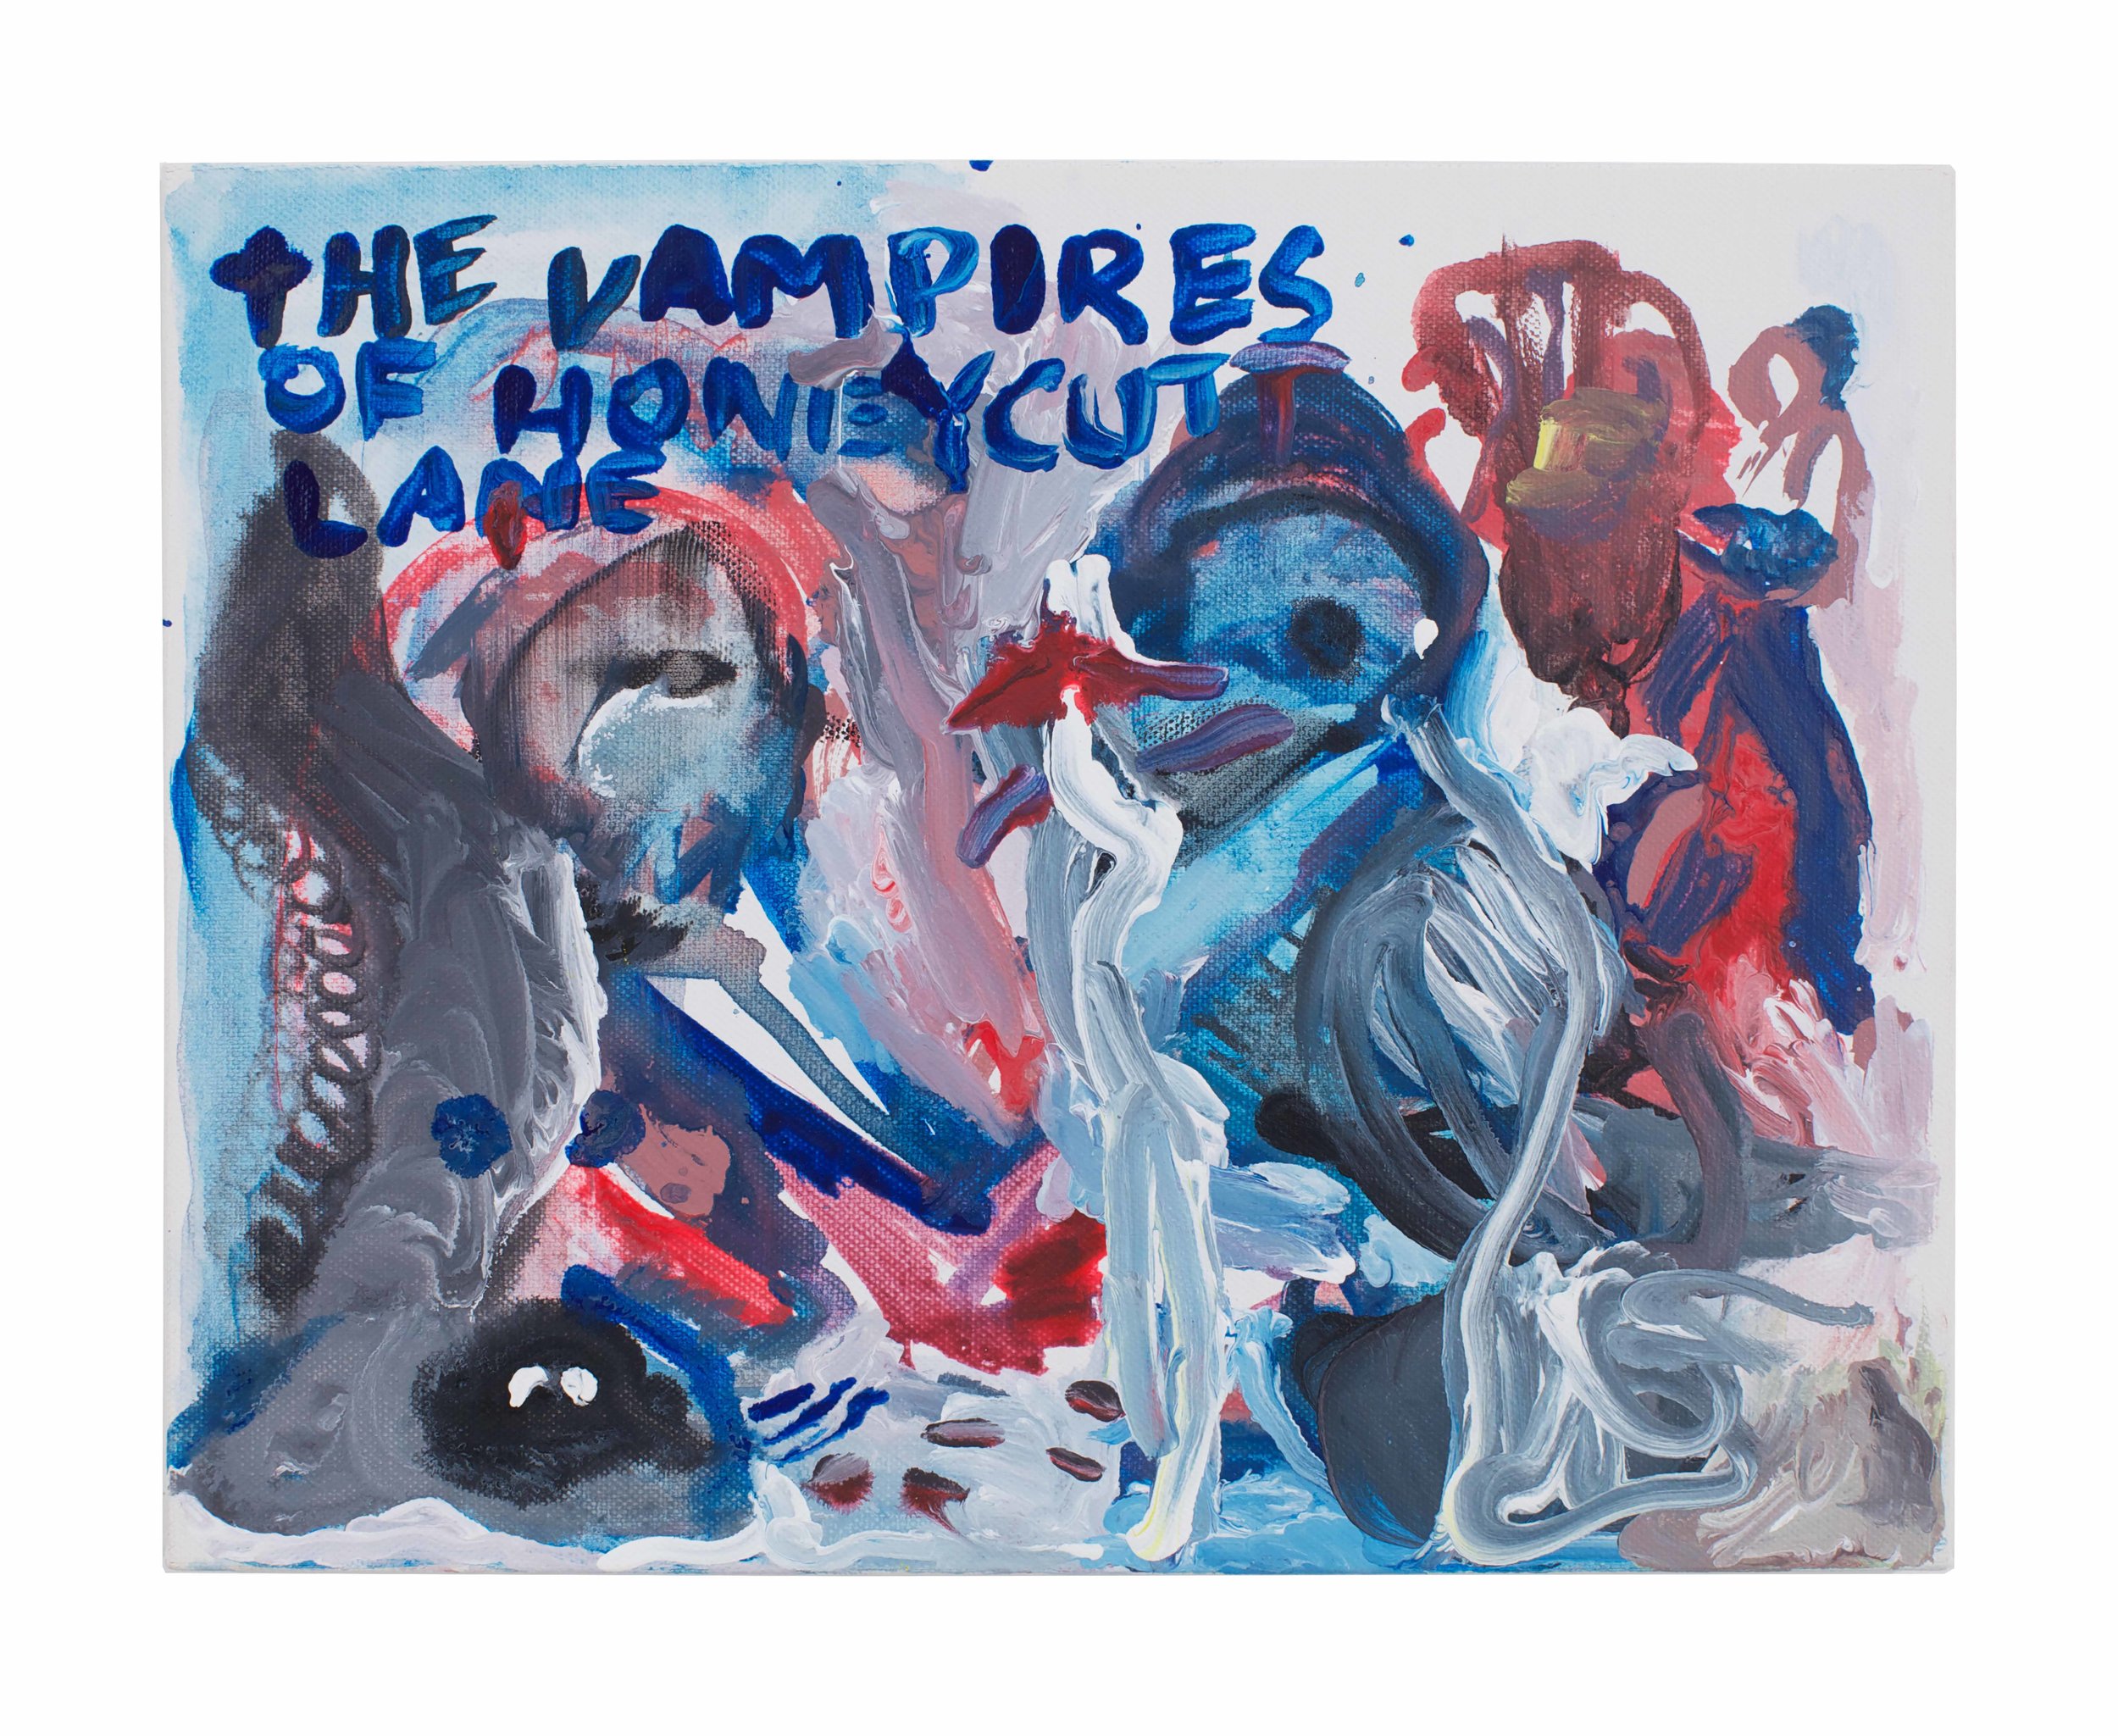  Drew Beattie and Ben Shepard  The Vampires of Honeycutt Lane   2014 acrylic on canvas 11 x 14 inches 